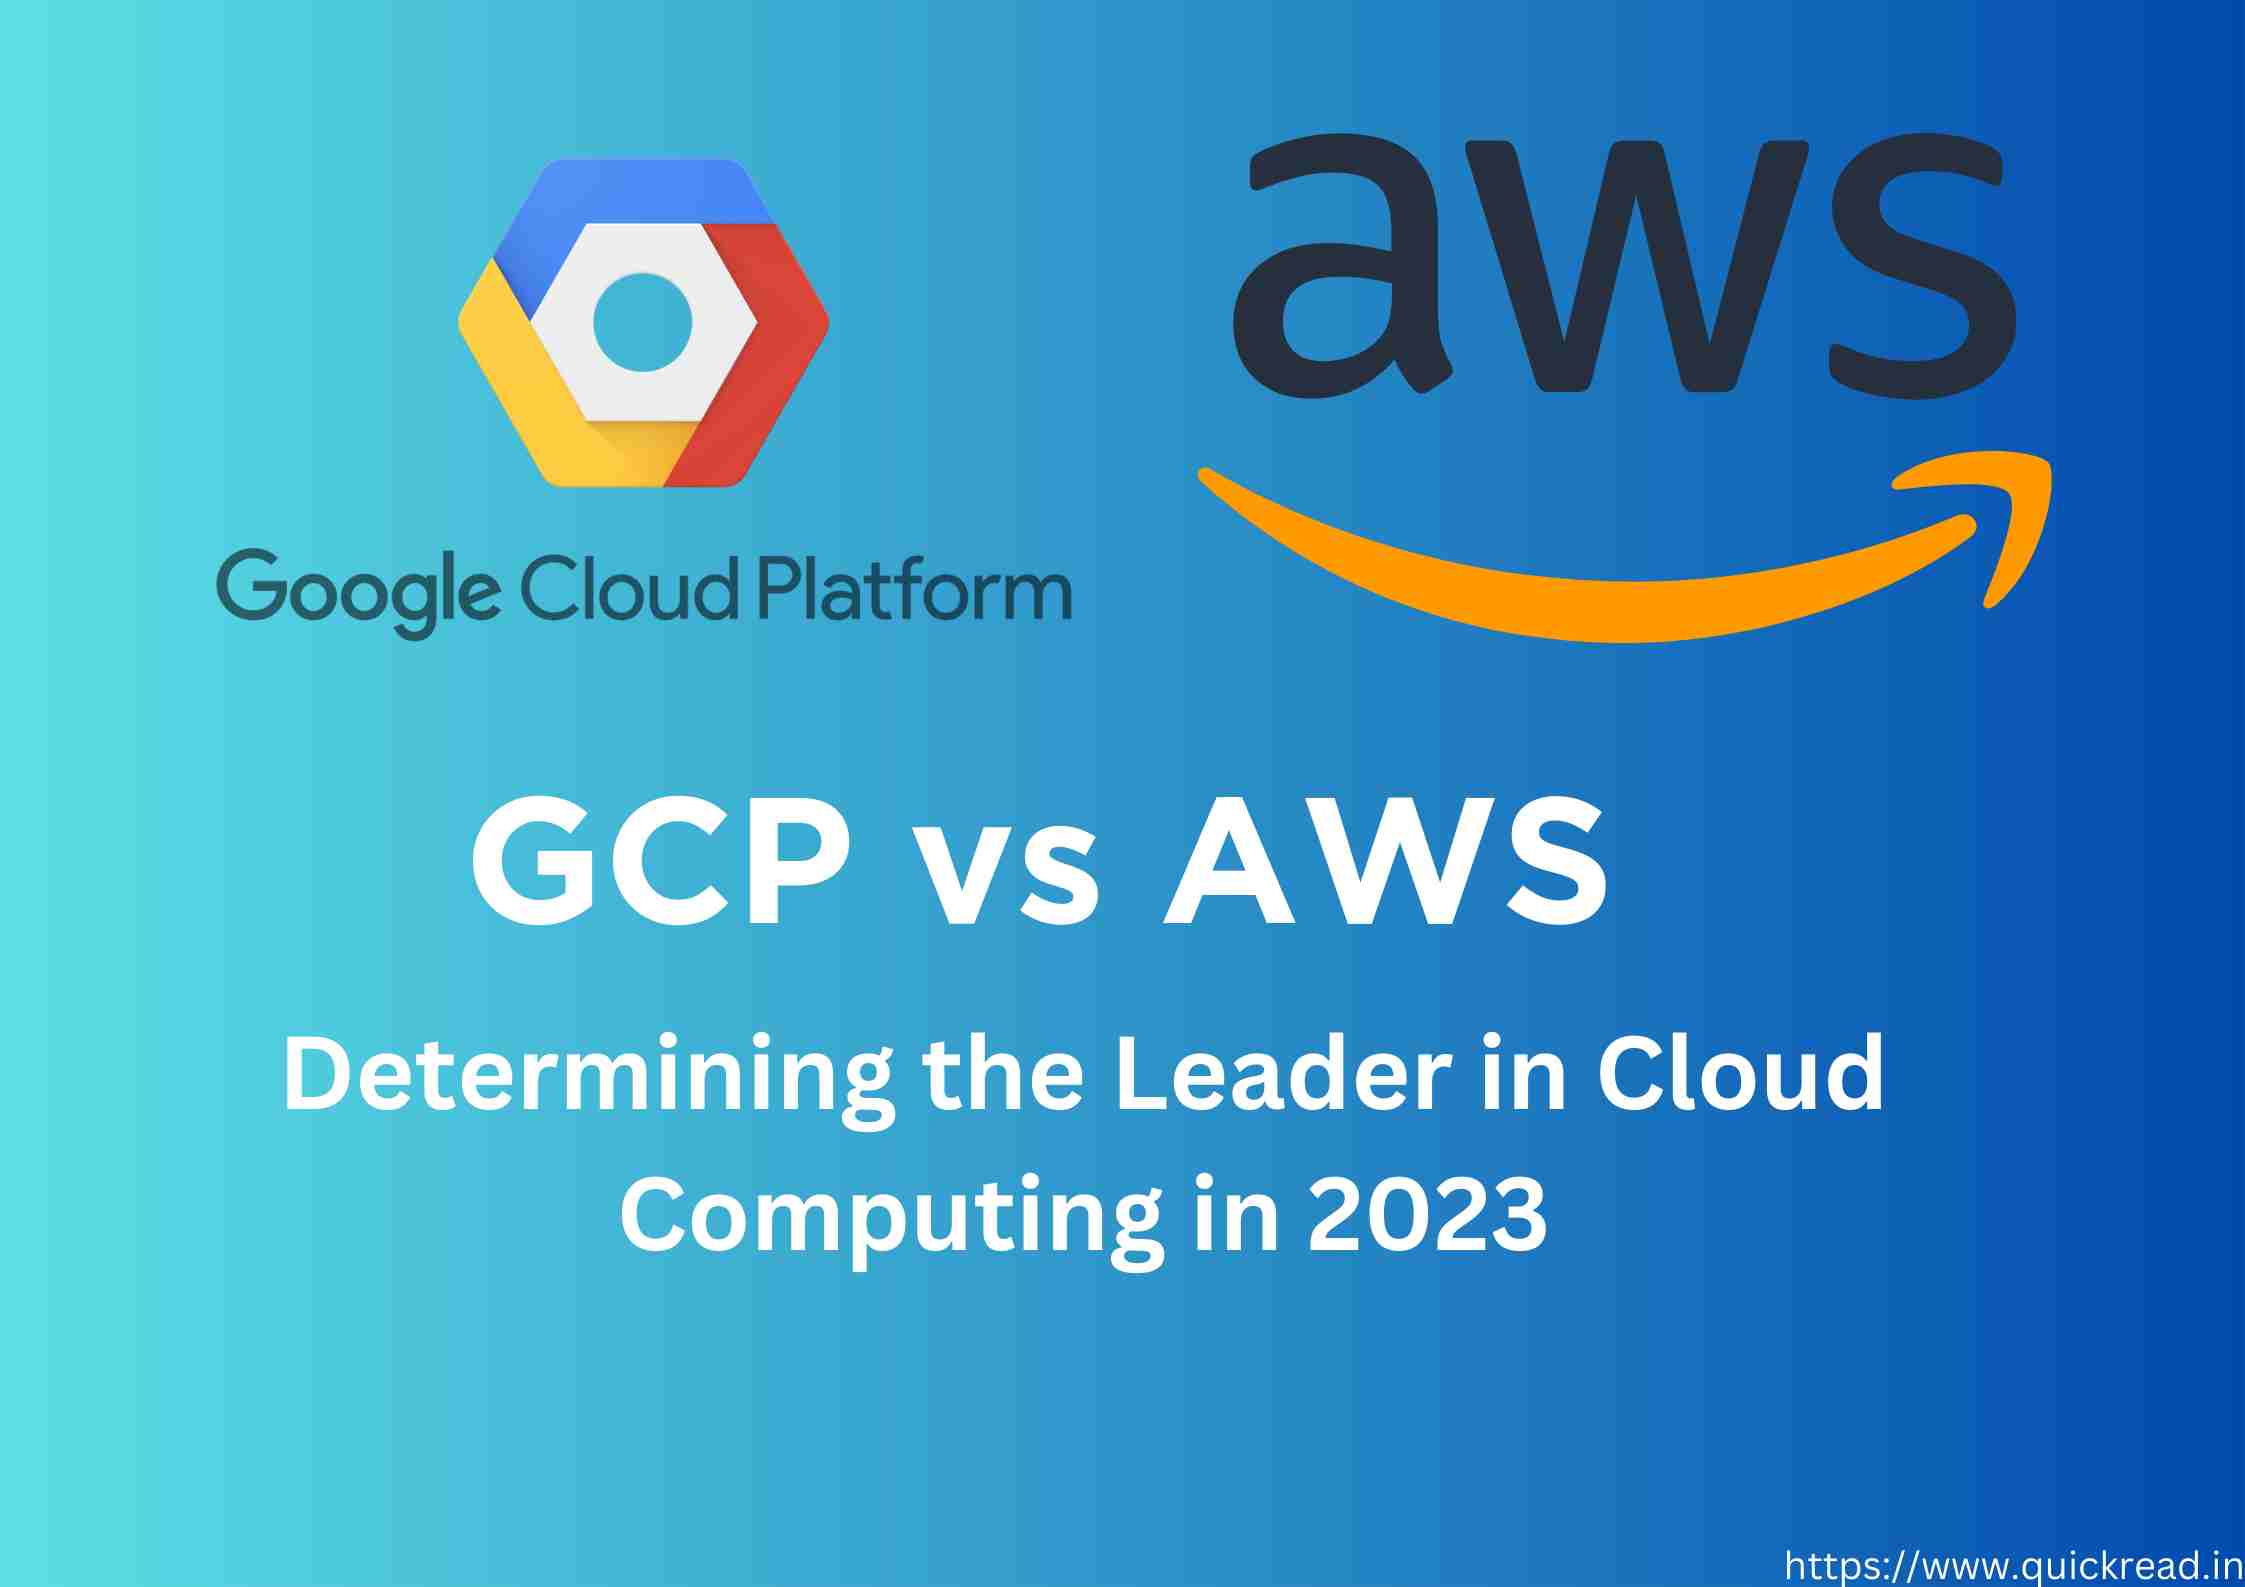 GCP vs AWS Determining the Leader in Cloud Computing in 2023